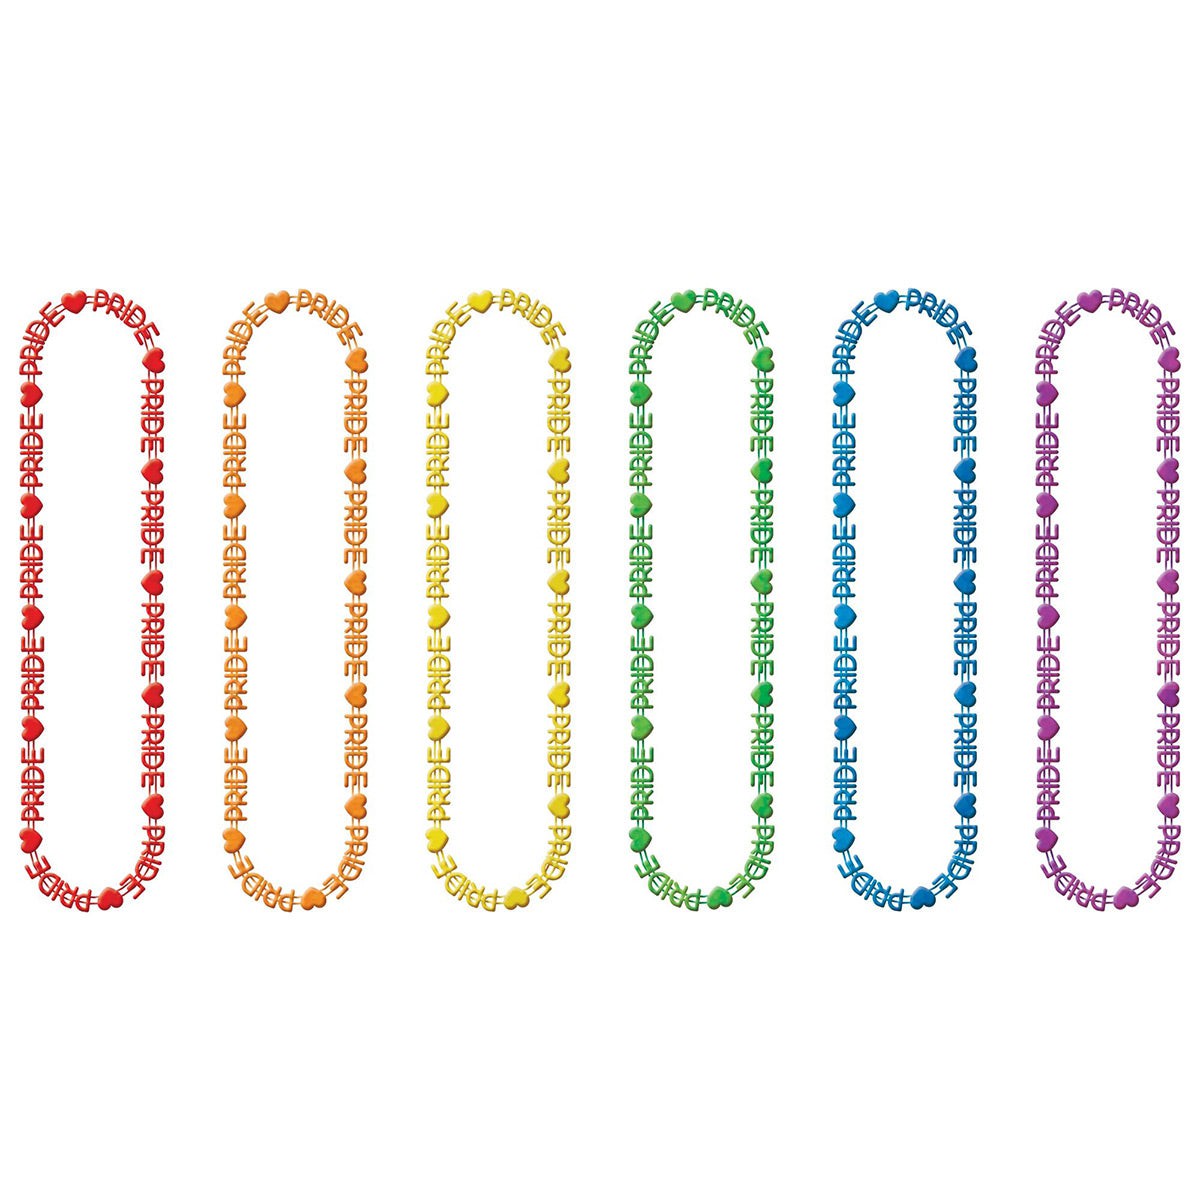 AMSCAN CA Pride Pride Word Beads Necklaces Assorted, 6 Count 192937319208